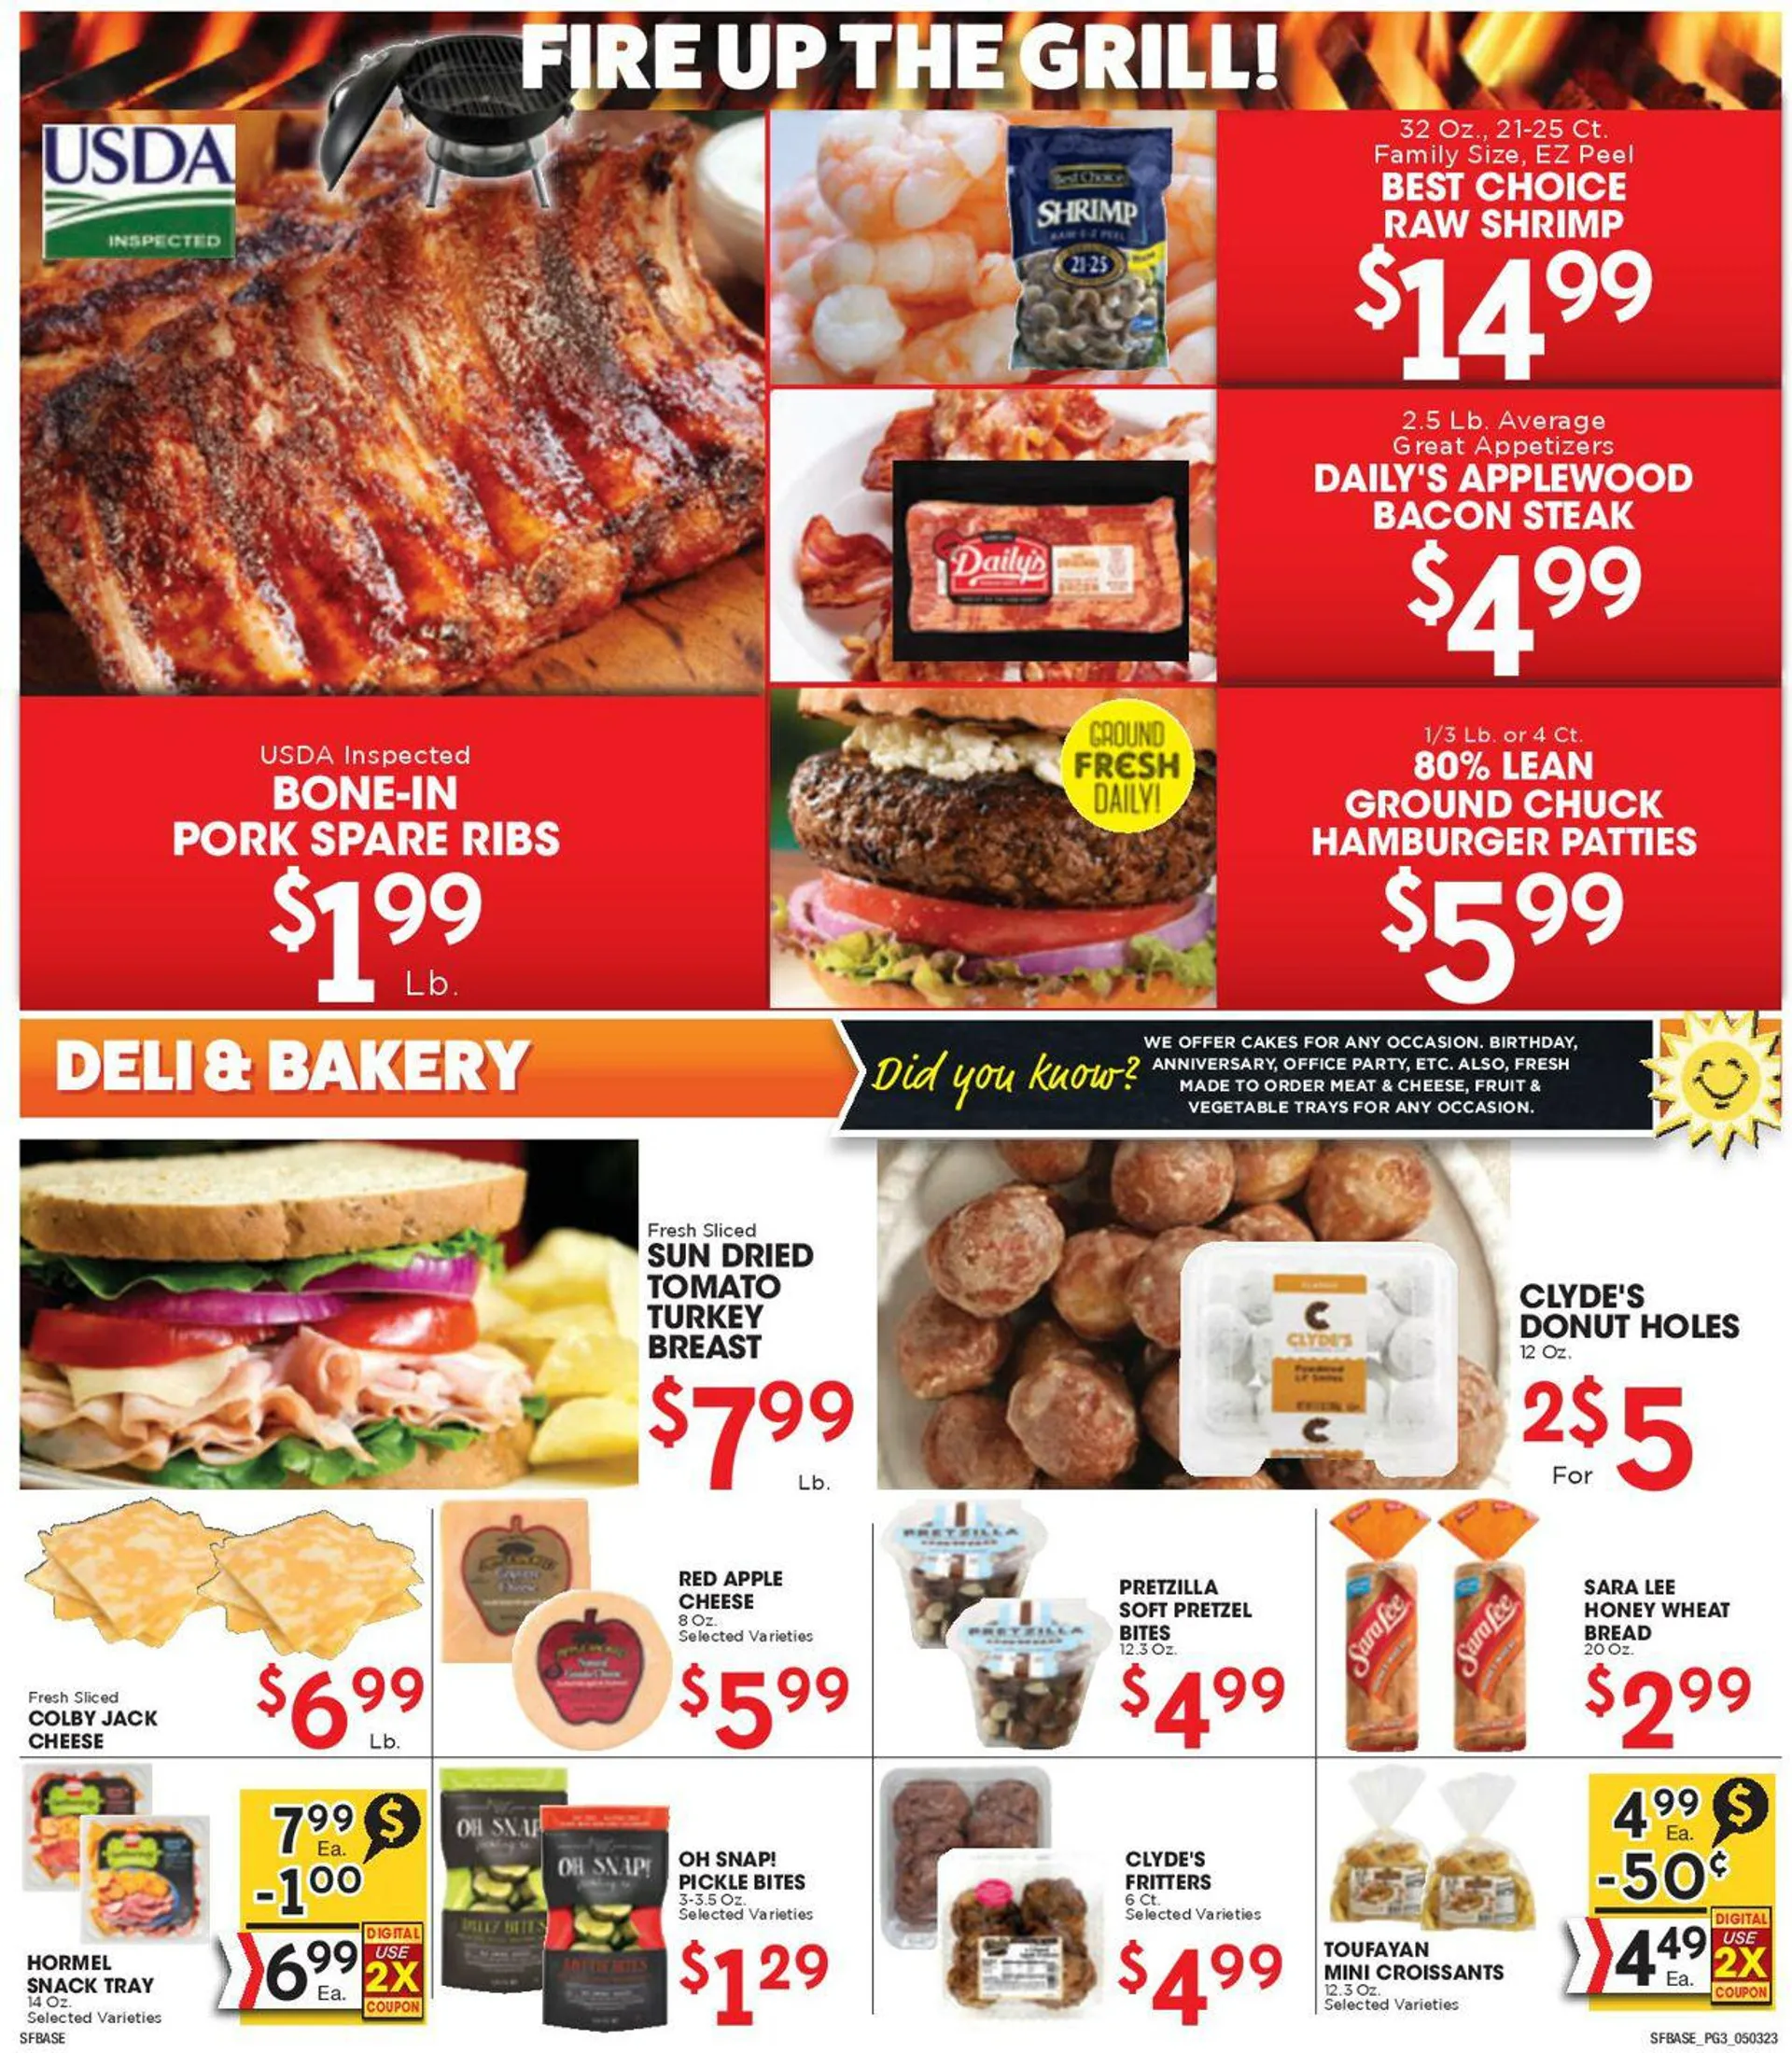 Sunshine Foods Current weekly ad - 3